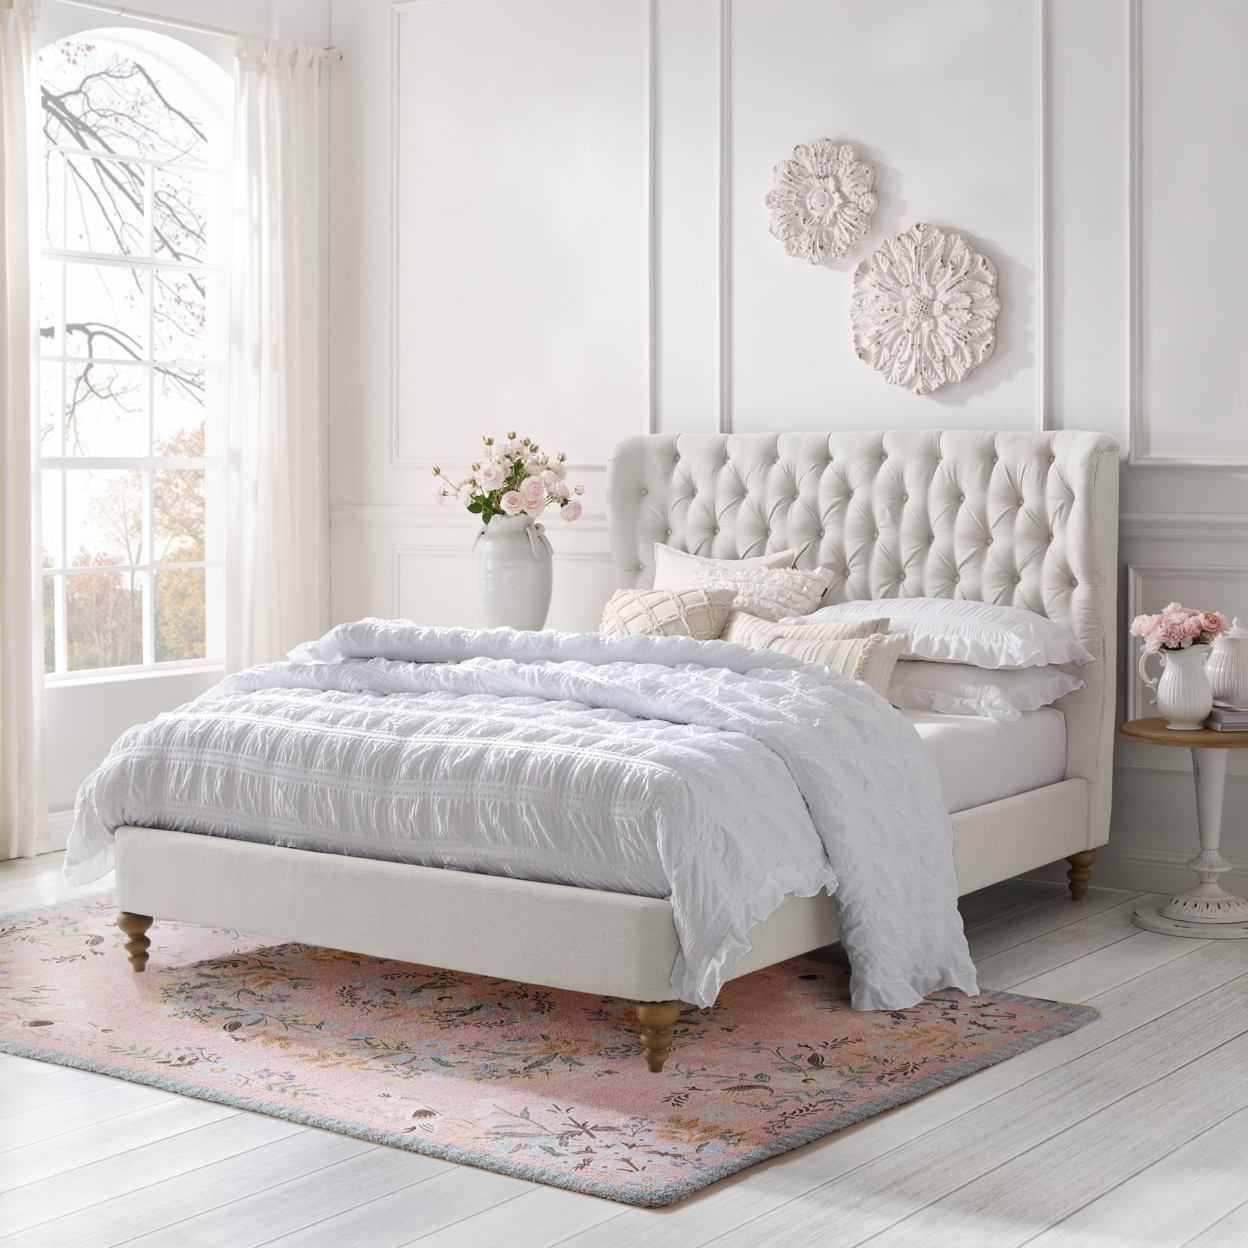 Kelsie Bed-Button Tufted Headboard-Wingback-Slats Included - Cream White, Queen